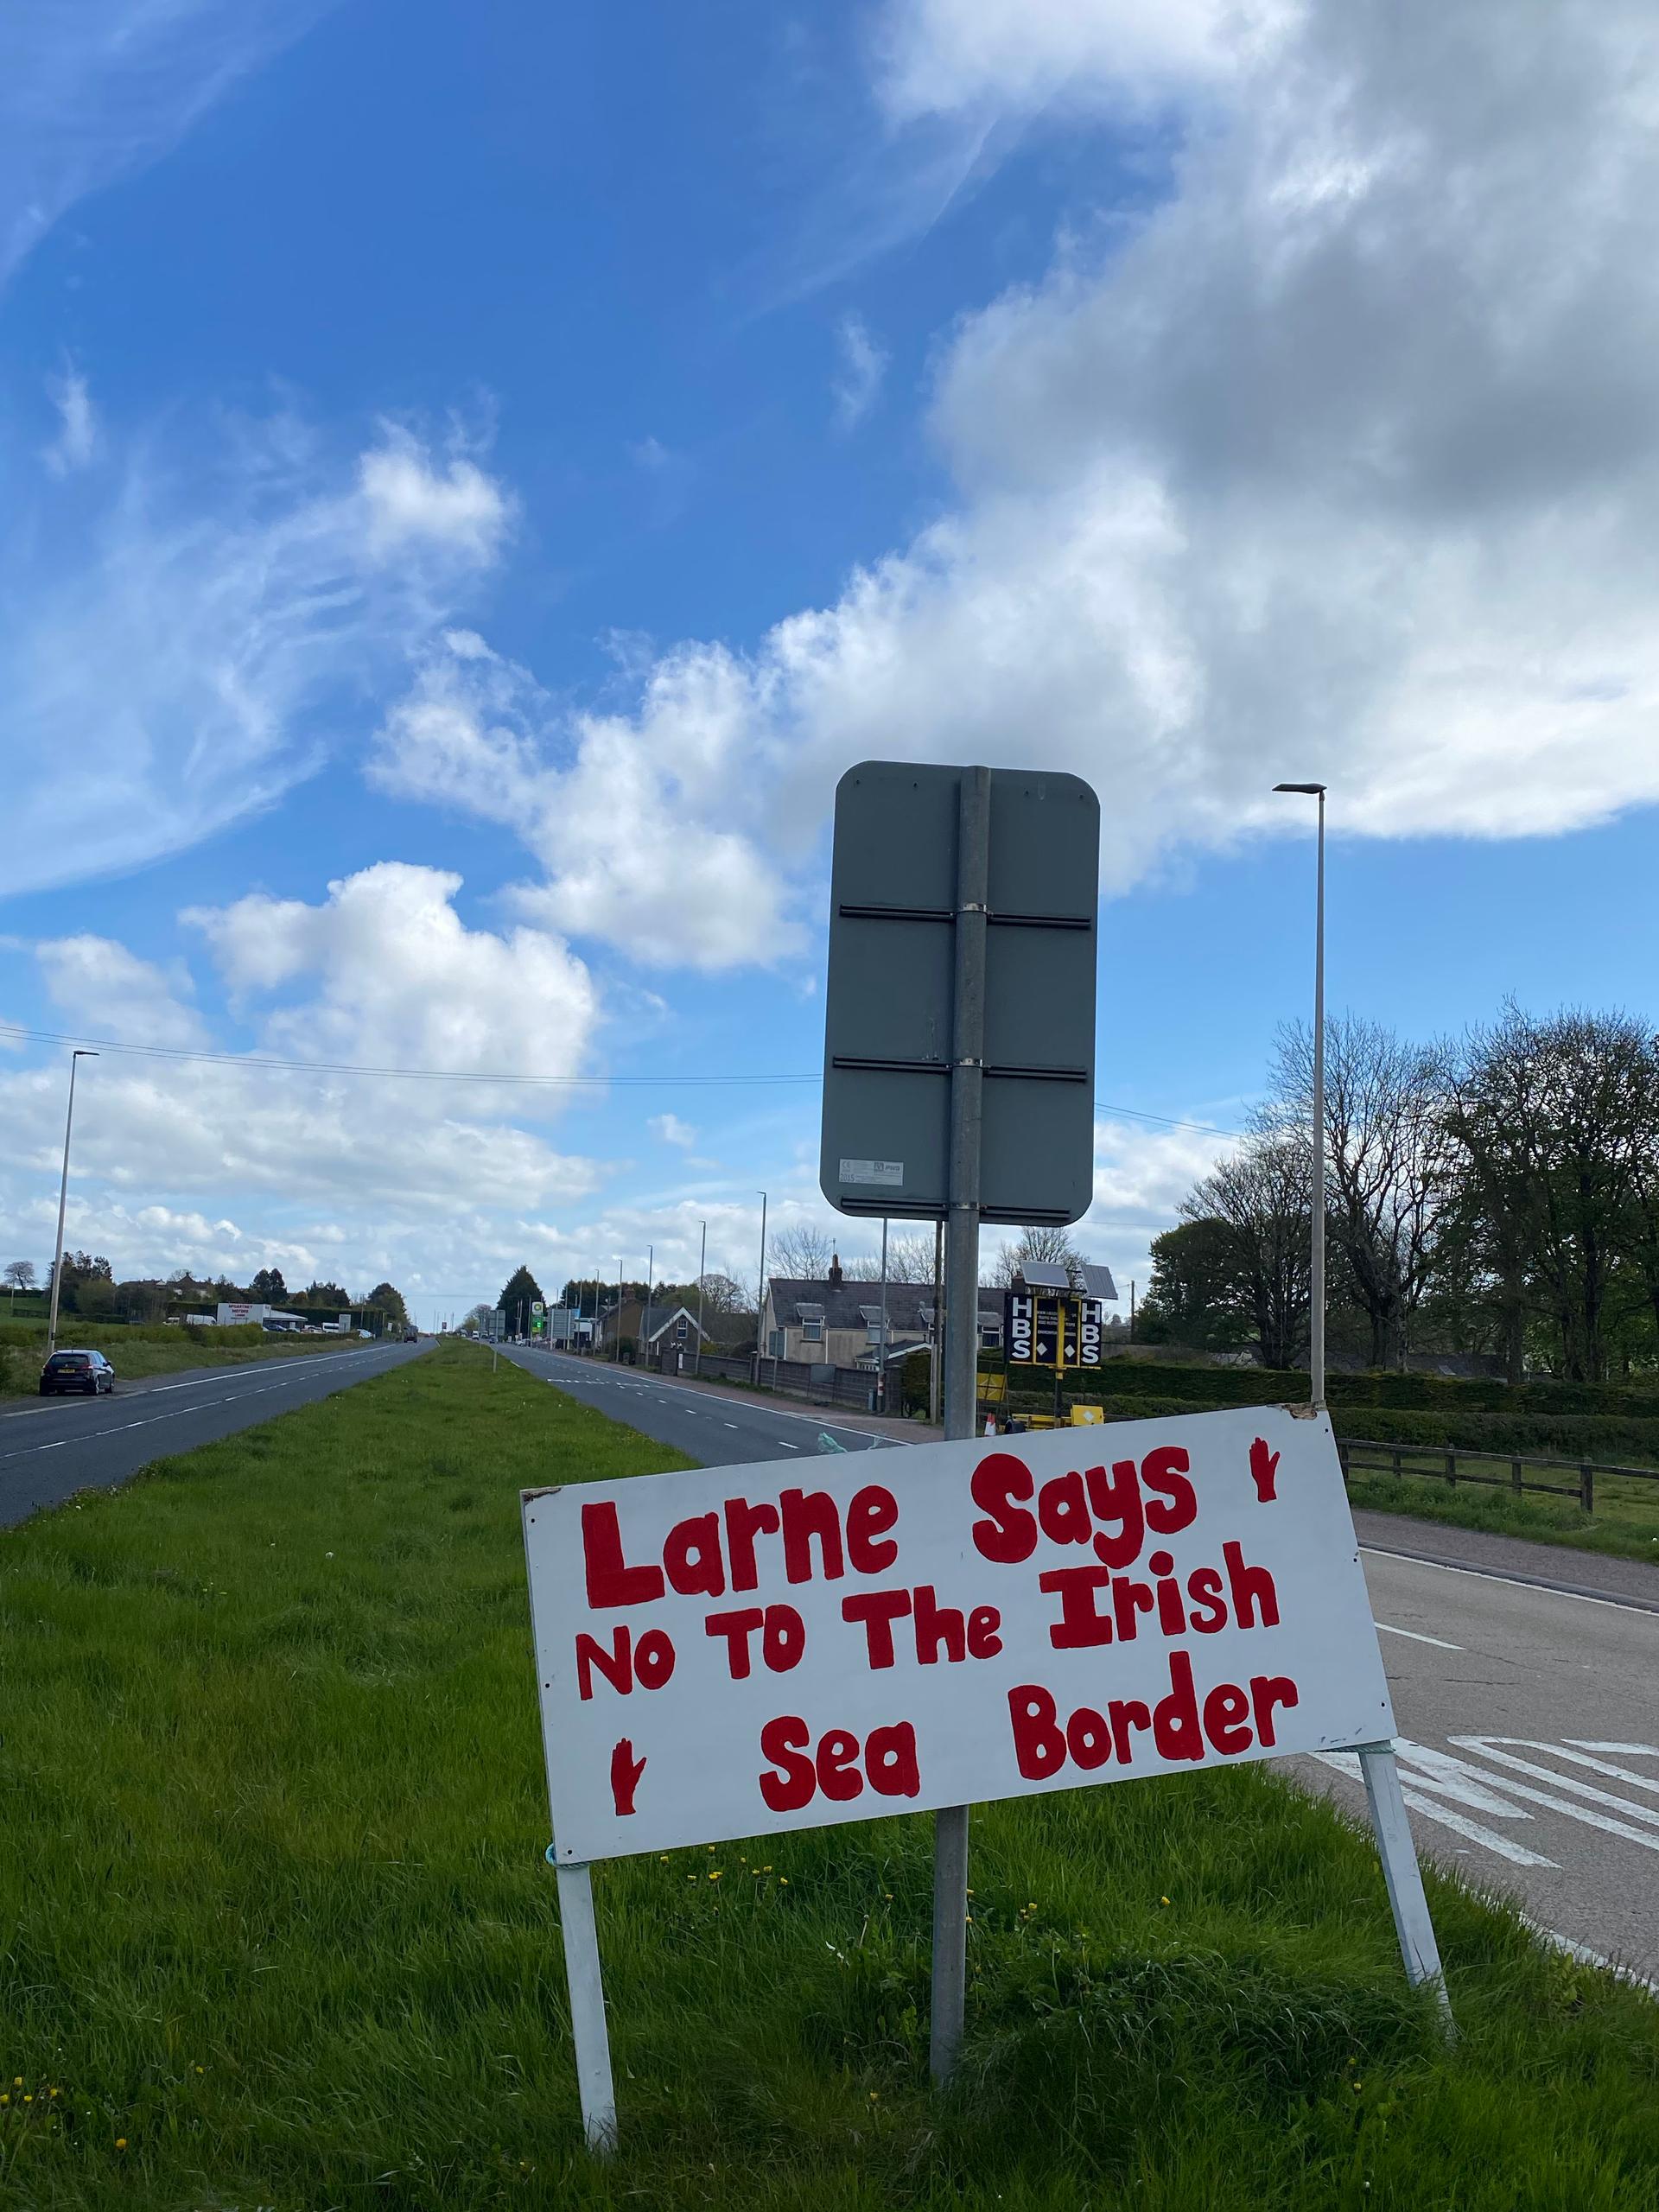 The port of Larne, where goods from mainland Britain are checked, has become a key flashpoint for protests.